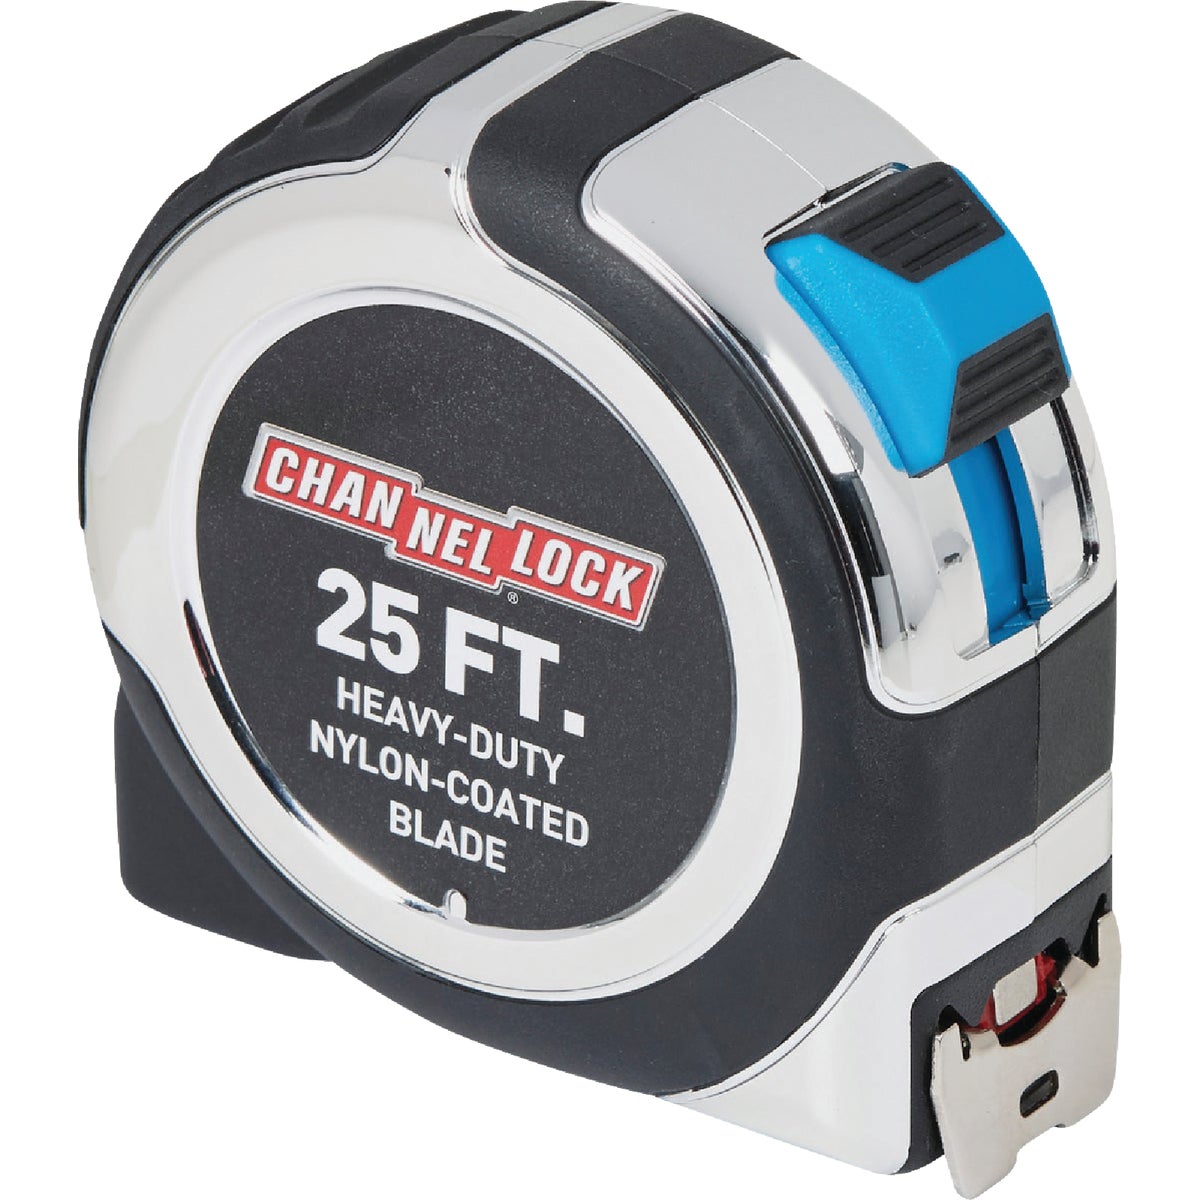 Channellock 25 Ft. Professional Tape Measure